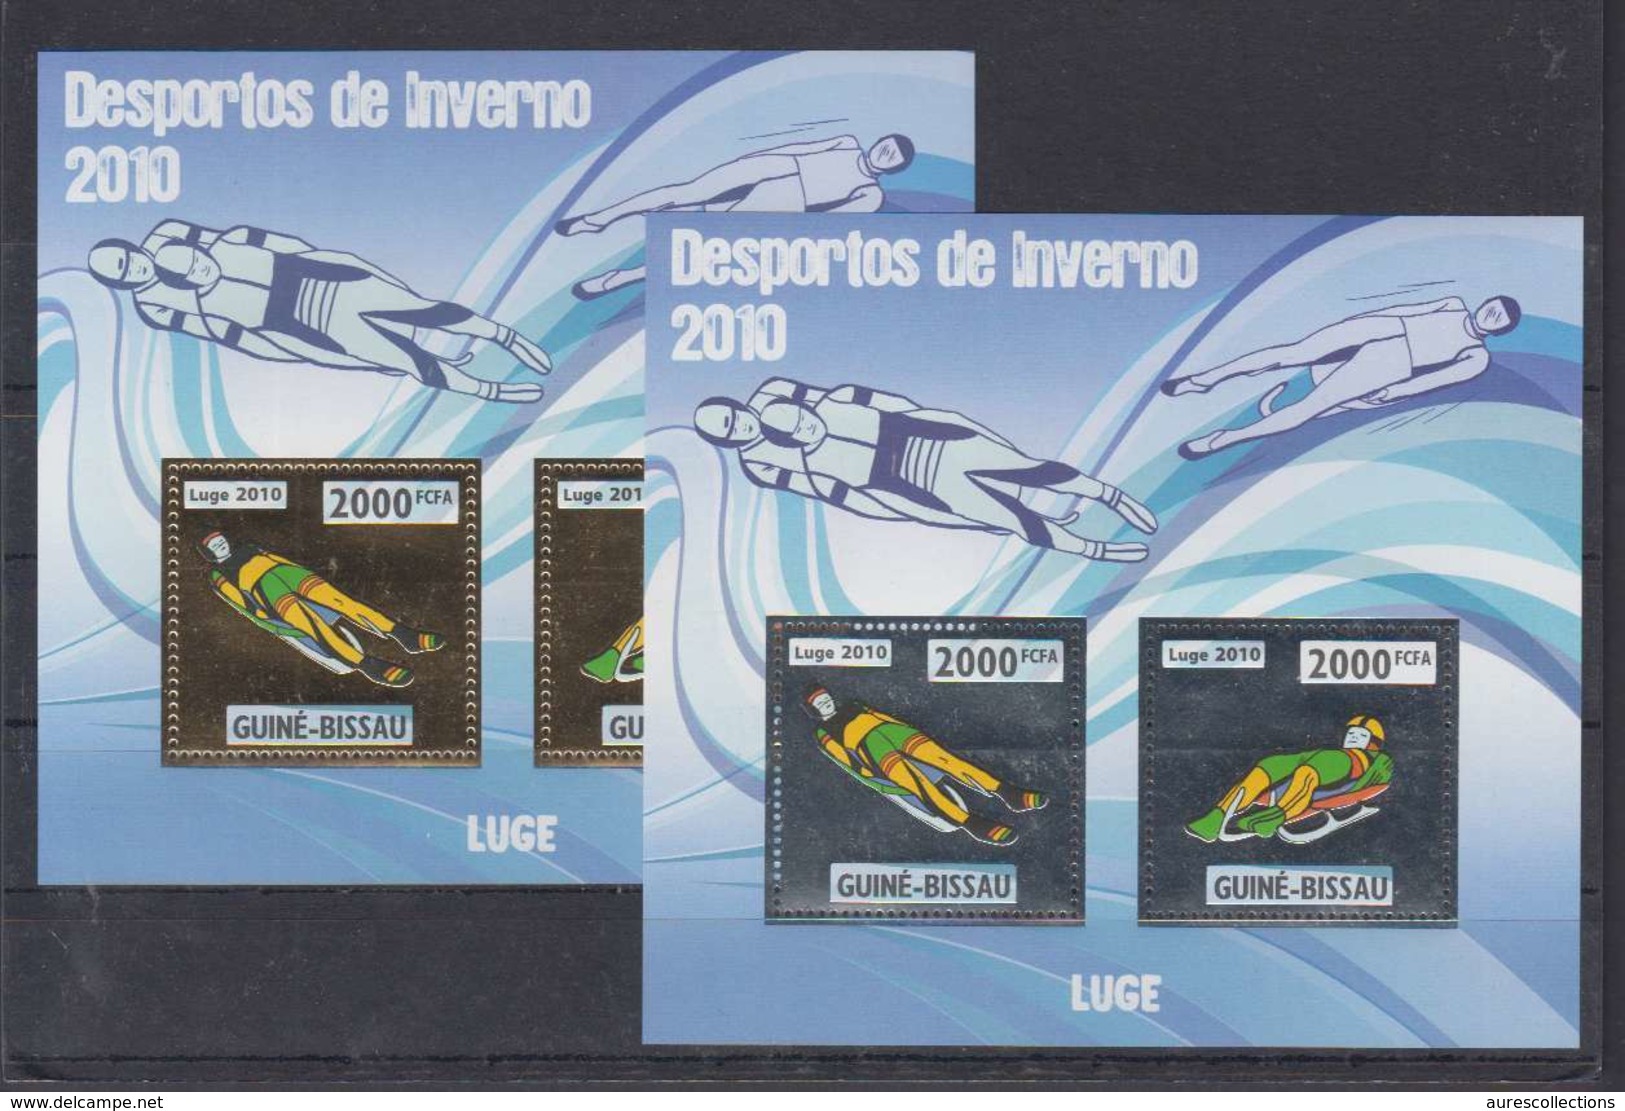 GUINEE BISSAU GUINE 2010 - WINTER OLYMPIC SPORT GAMES VANCOUVER CANADA - LUGE LUGEN - GOLD + SILVER - RARE MNH - Invierno 2010: Vancouver